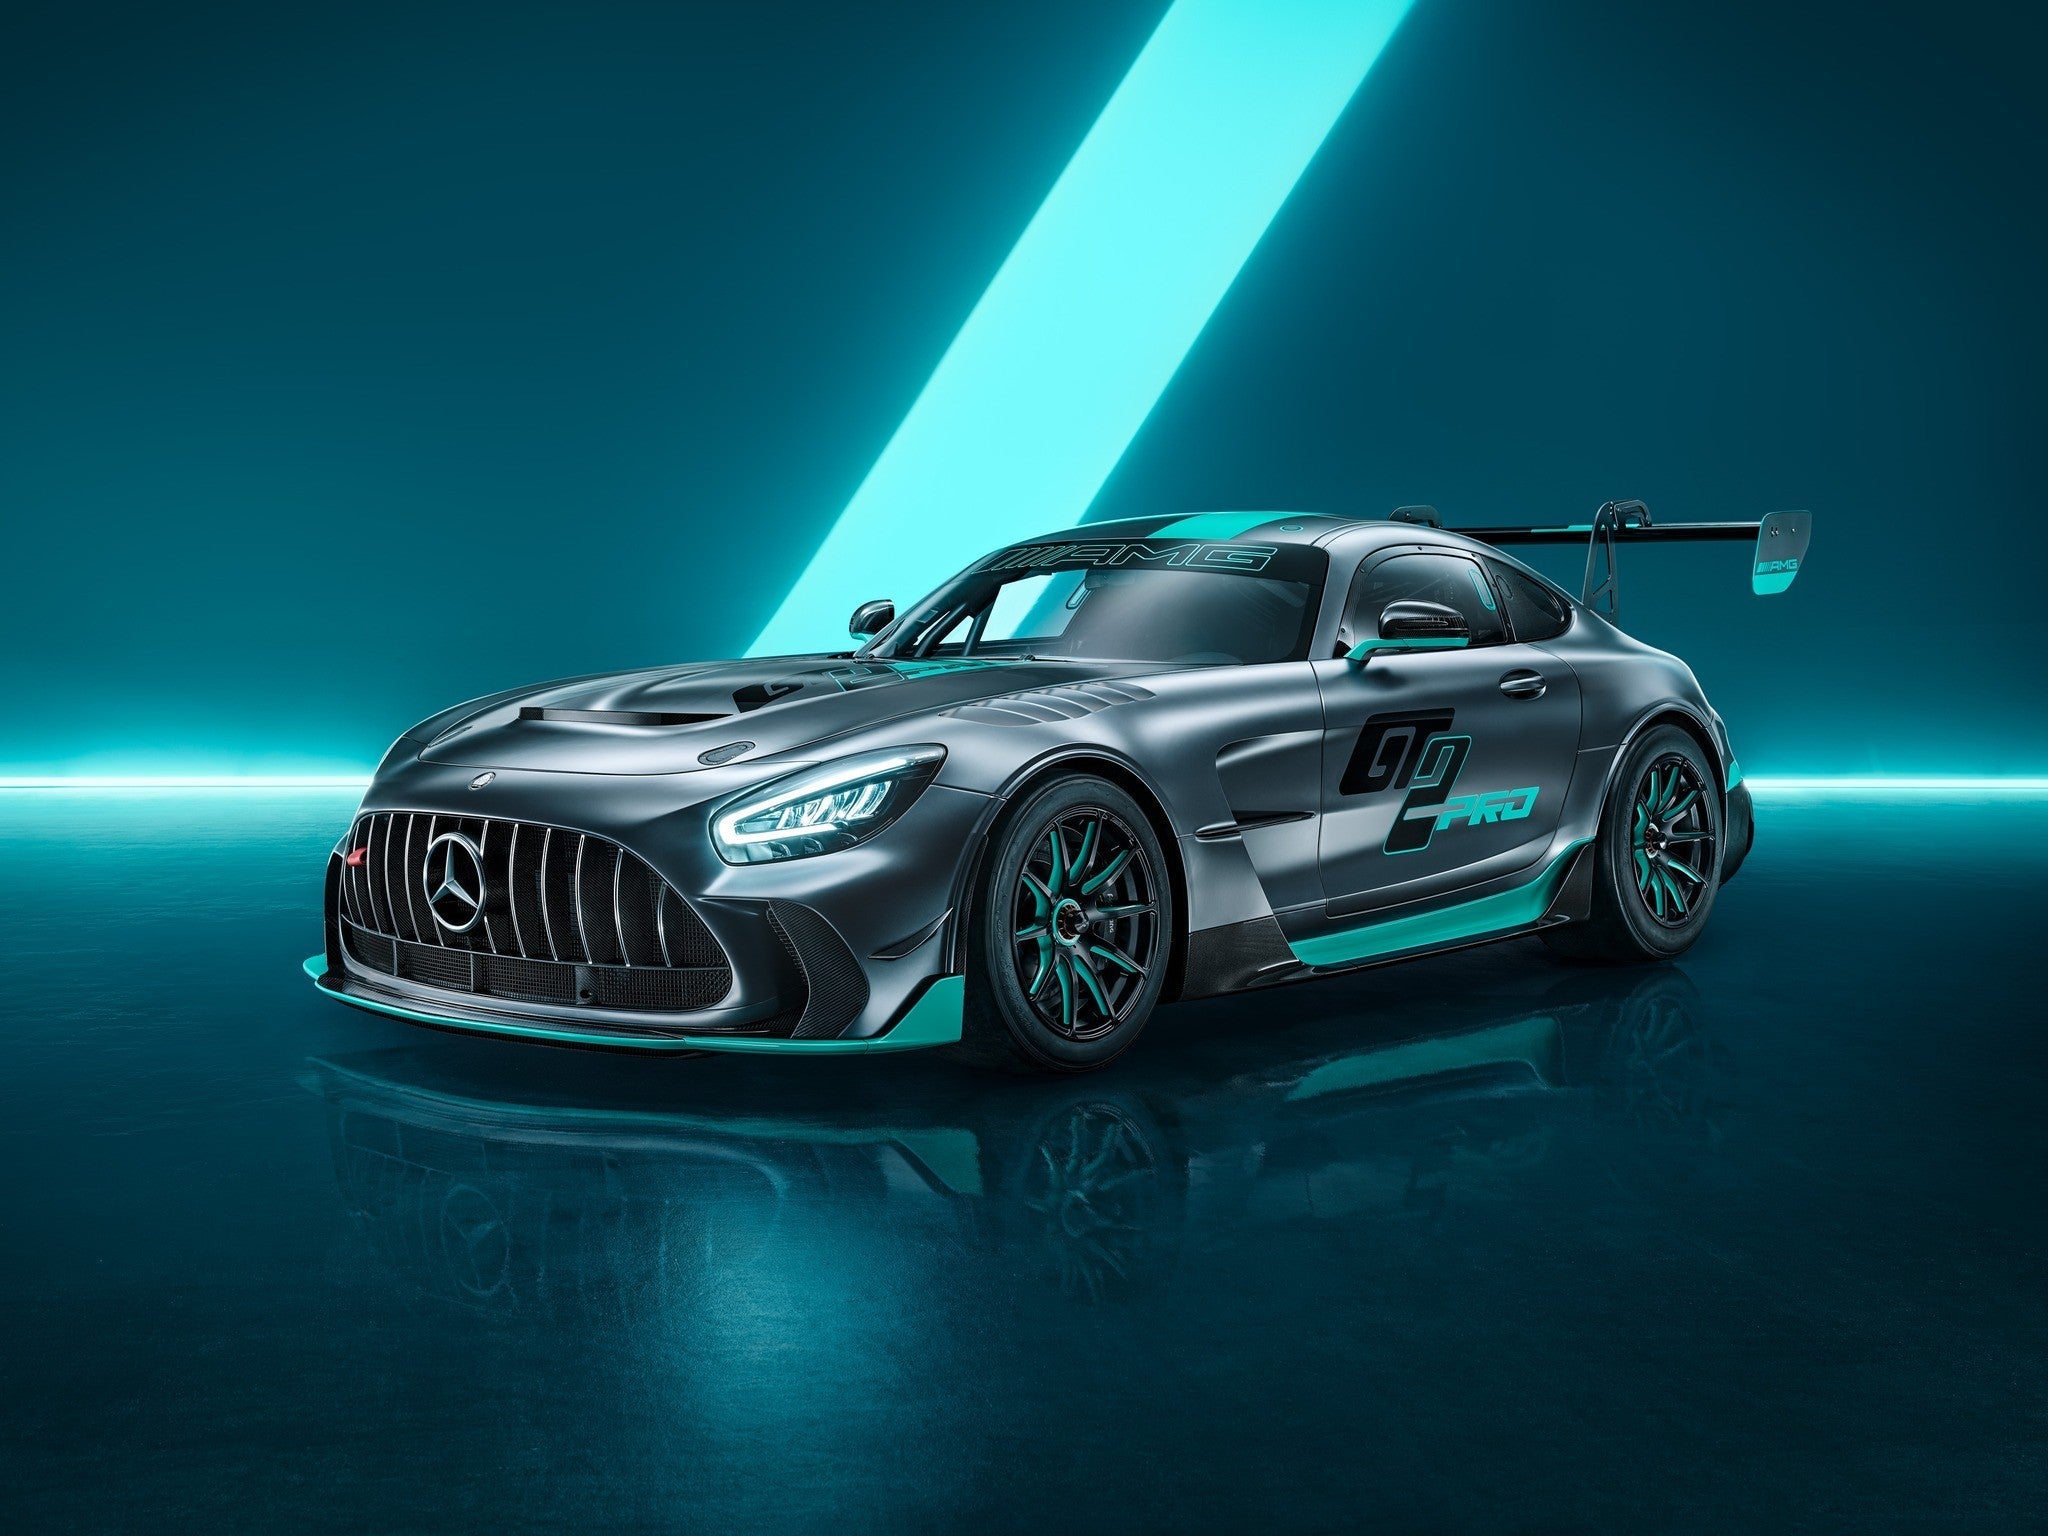 MERCEDES-AMG GT2 PRO RACE CAR FIRST LOOK – TheArsenale